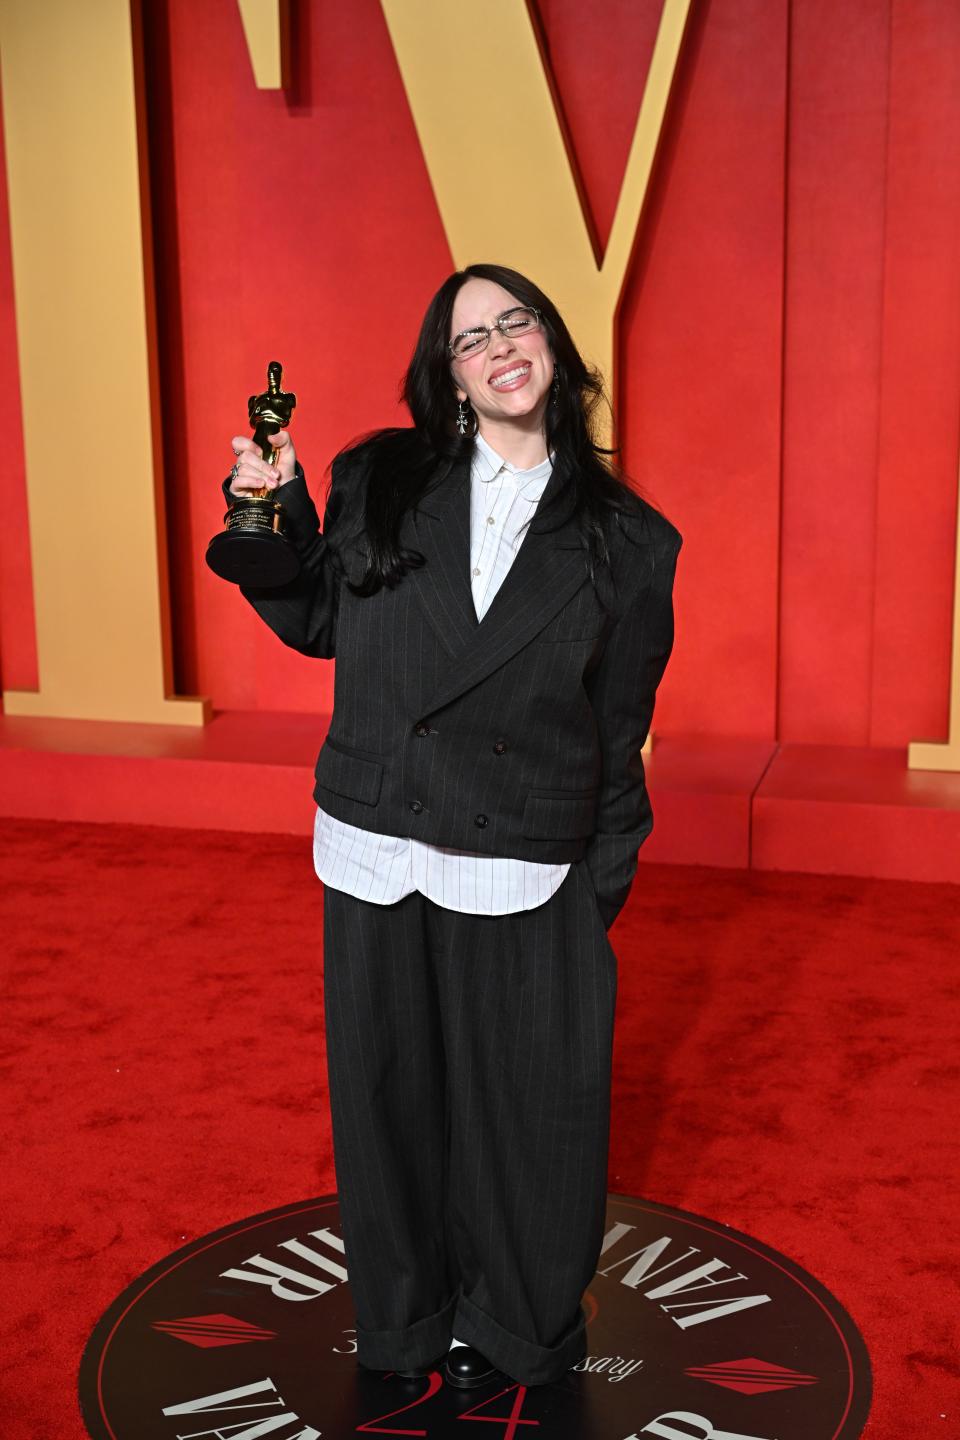 Image may contain: Billie Eilish, Fashion, Adult, Person, Accessories, Glasses, Face, Head, Clothing, Formal Wear, and Suit